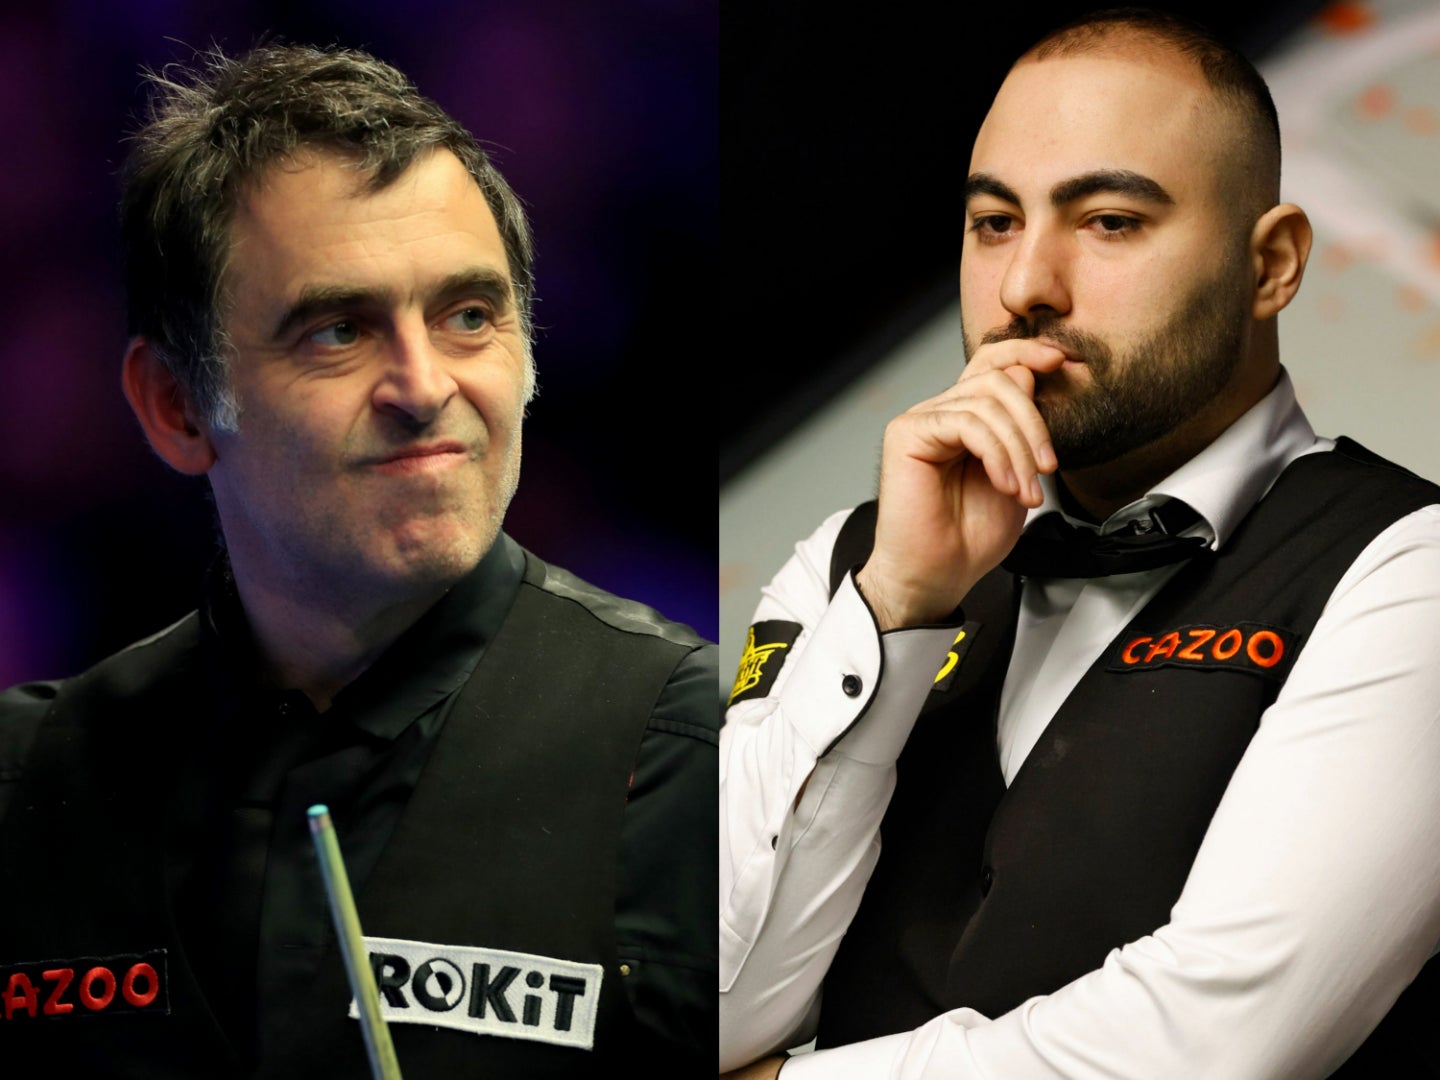 Ronnie O’Sullivan and Hossein Vafaei will go head to head in a mouthwatering second-round match-up at the World Snooker Championship